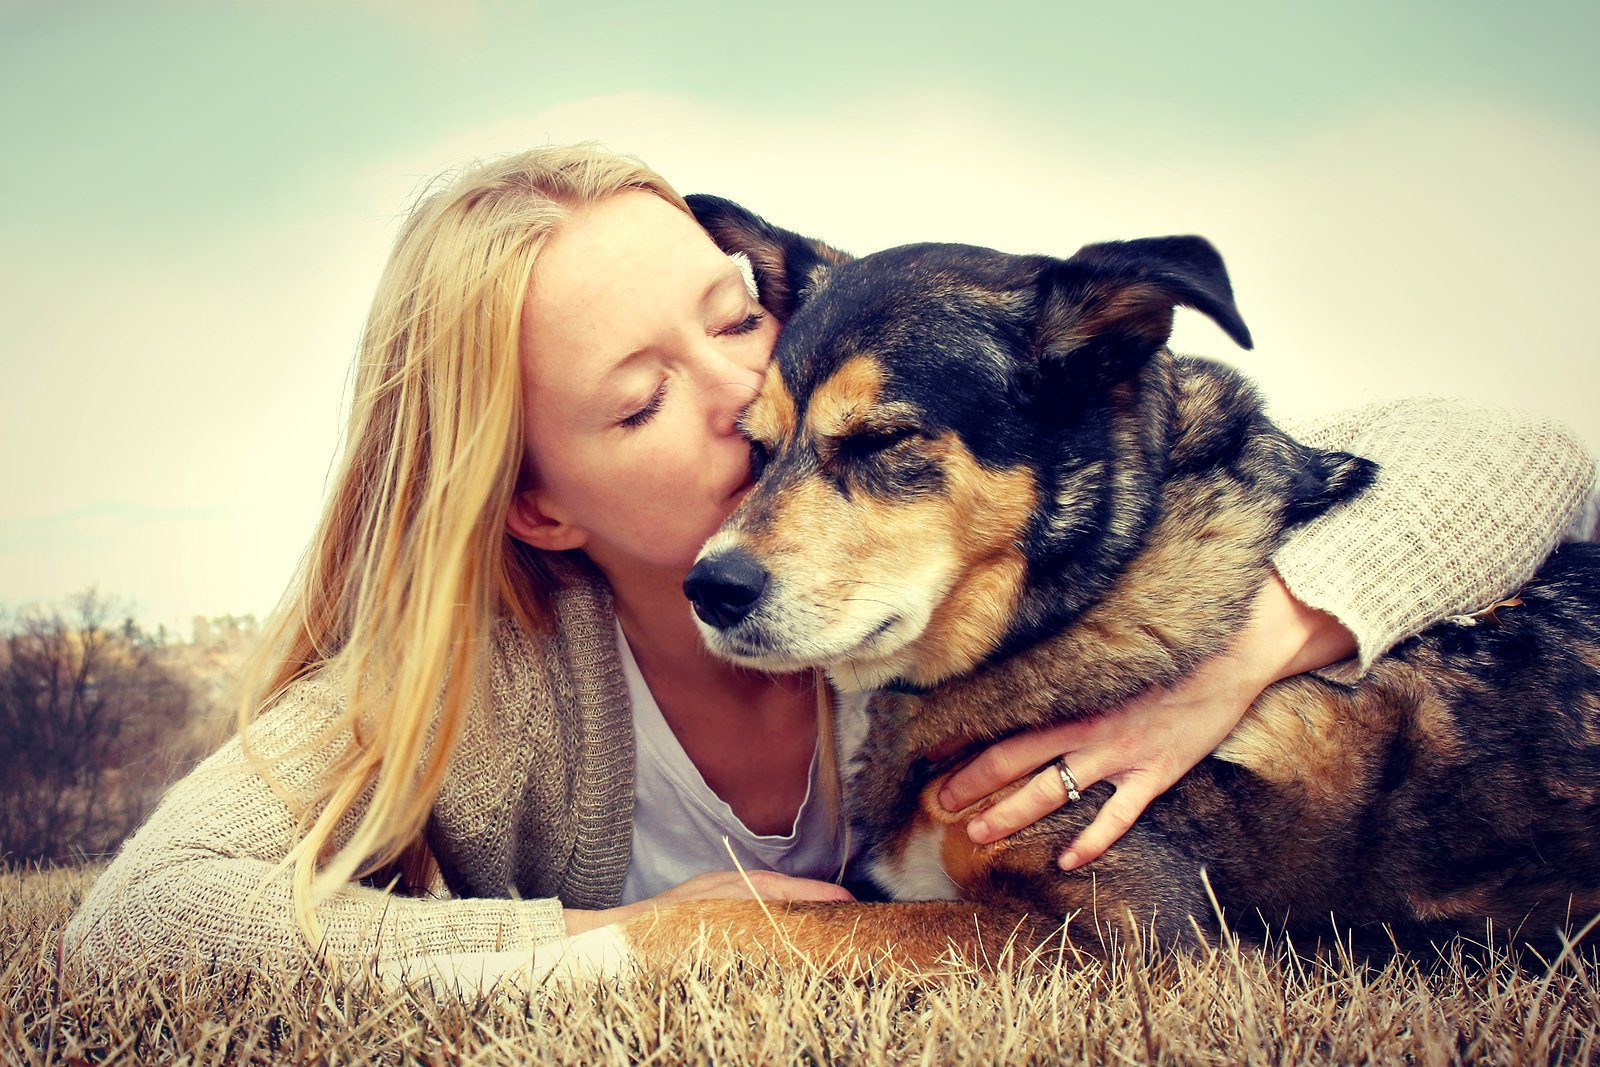 21 Signs Your Dog Is Your Best Friend